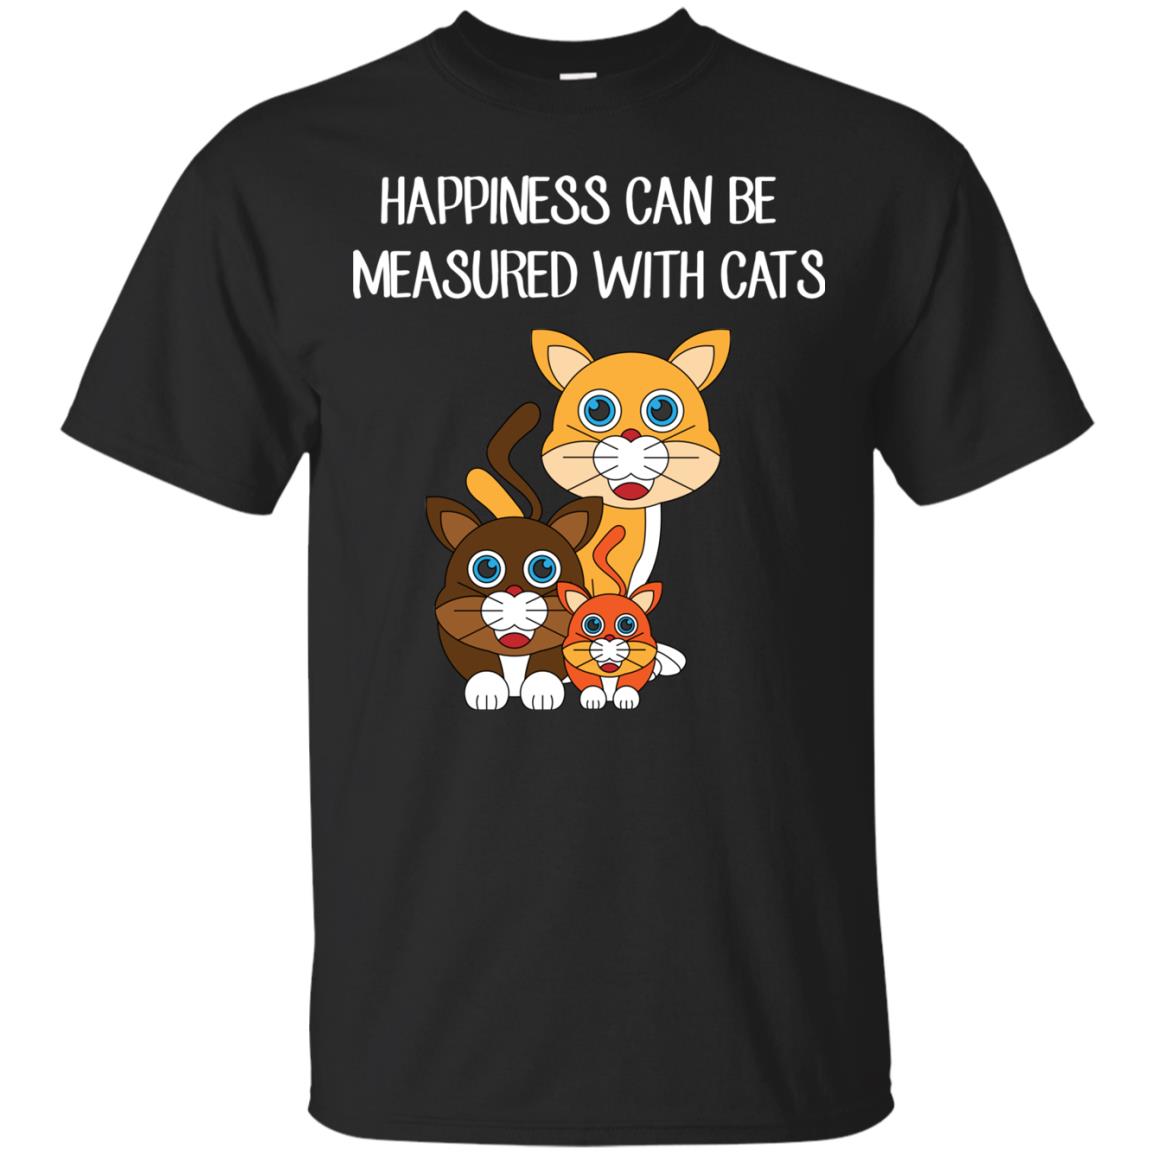 Happiness can be measured with cats t-shirts, hoodies, tank